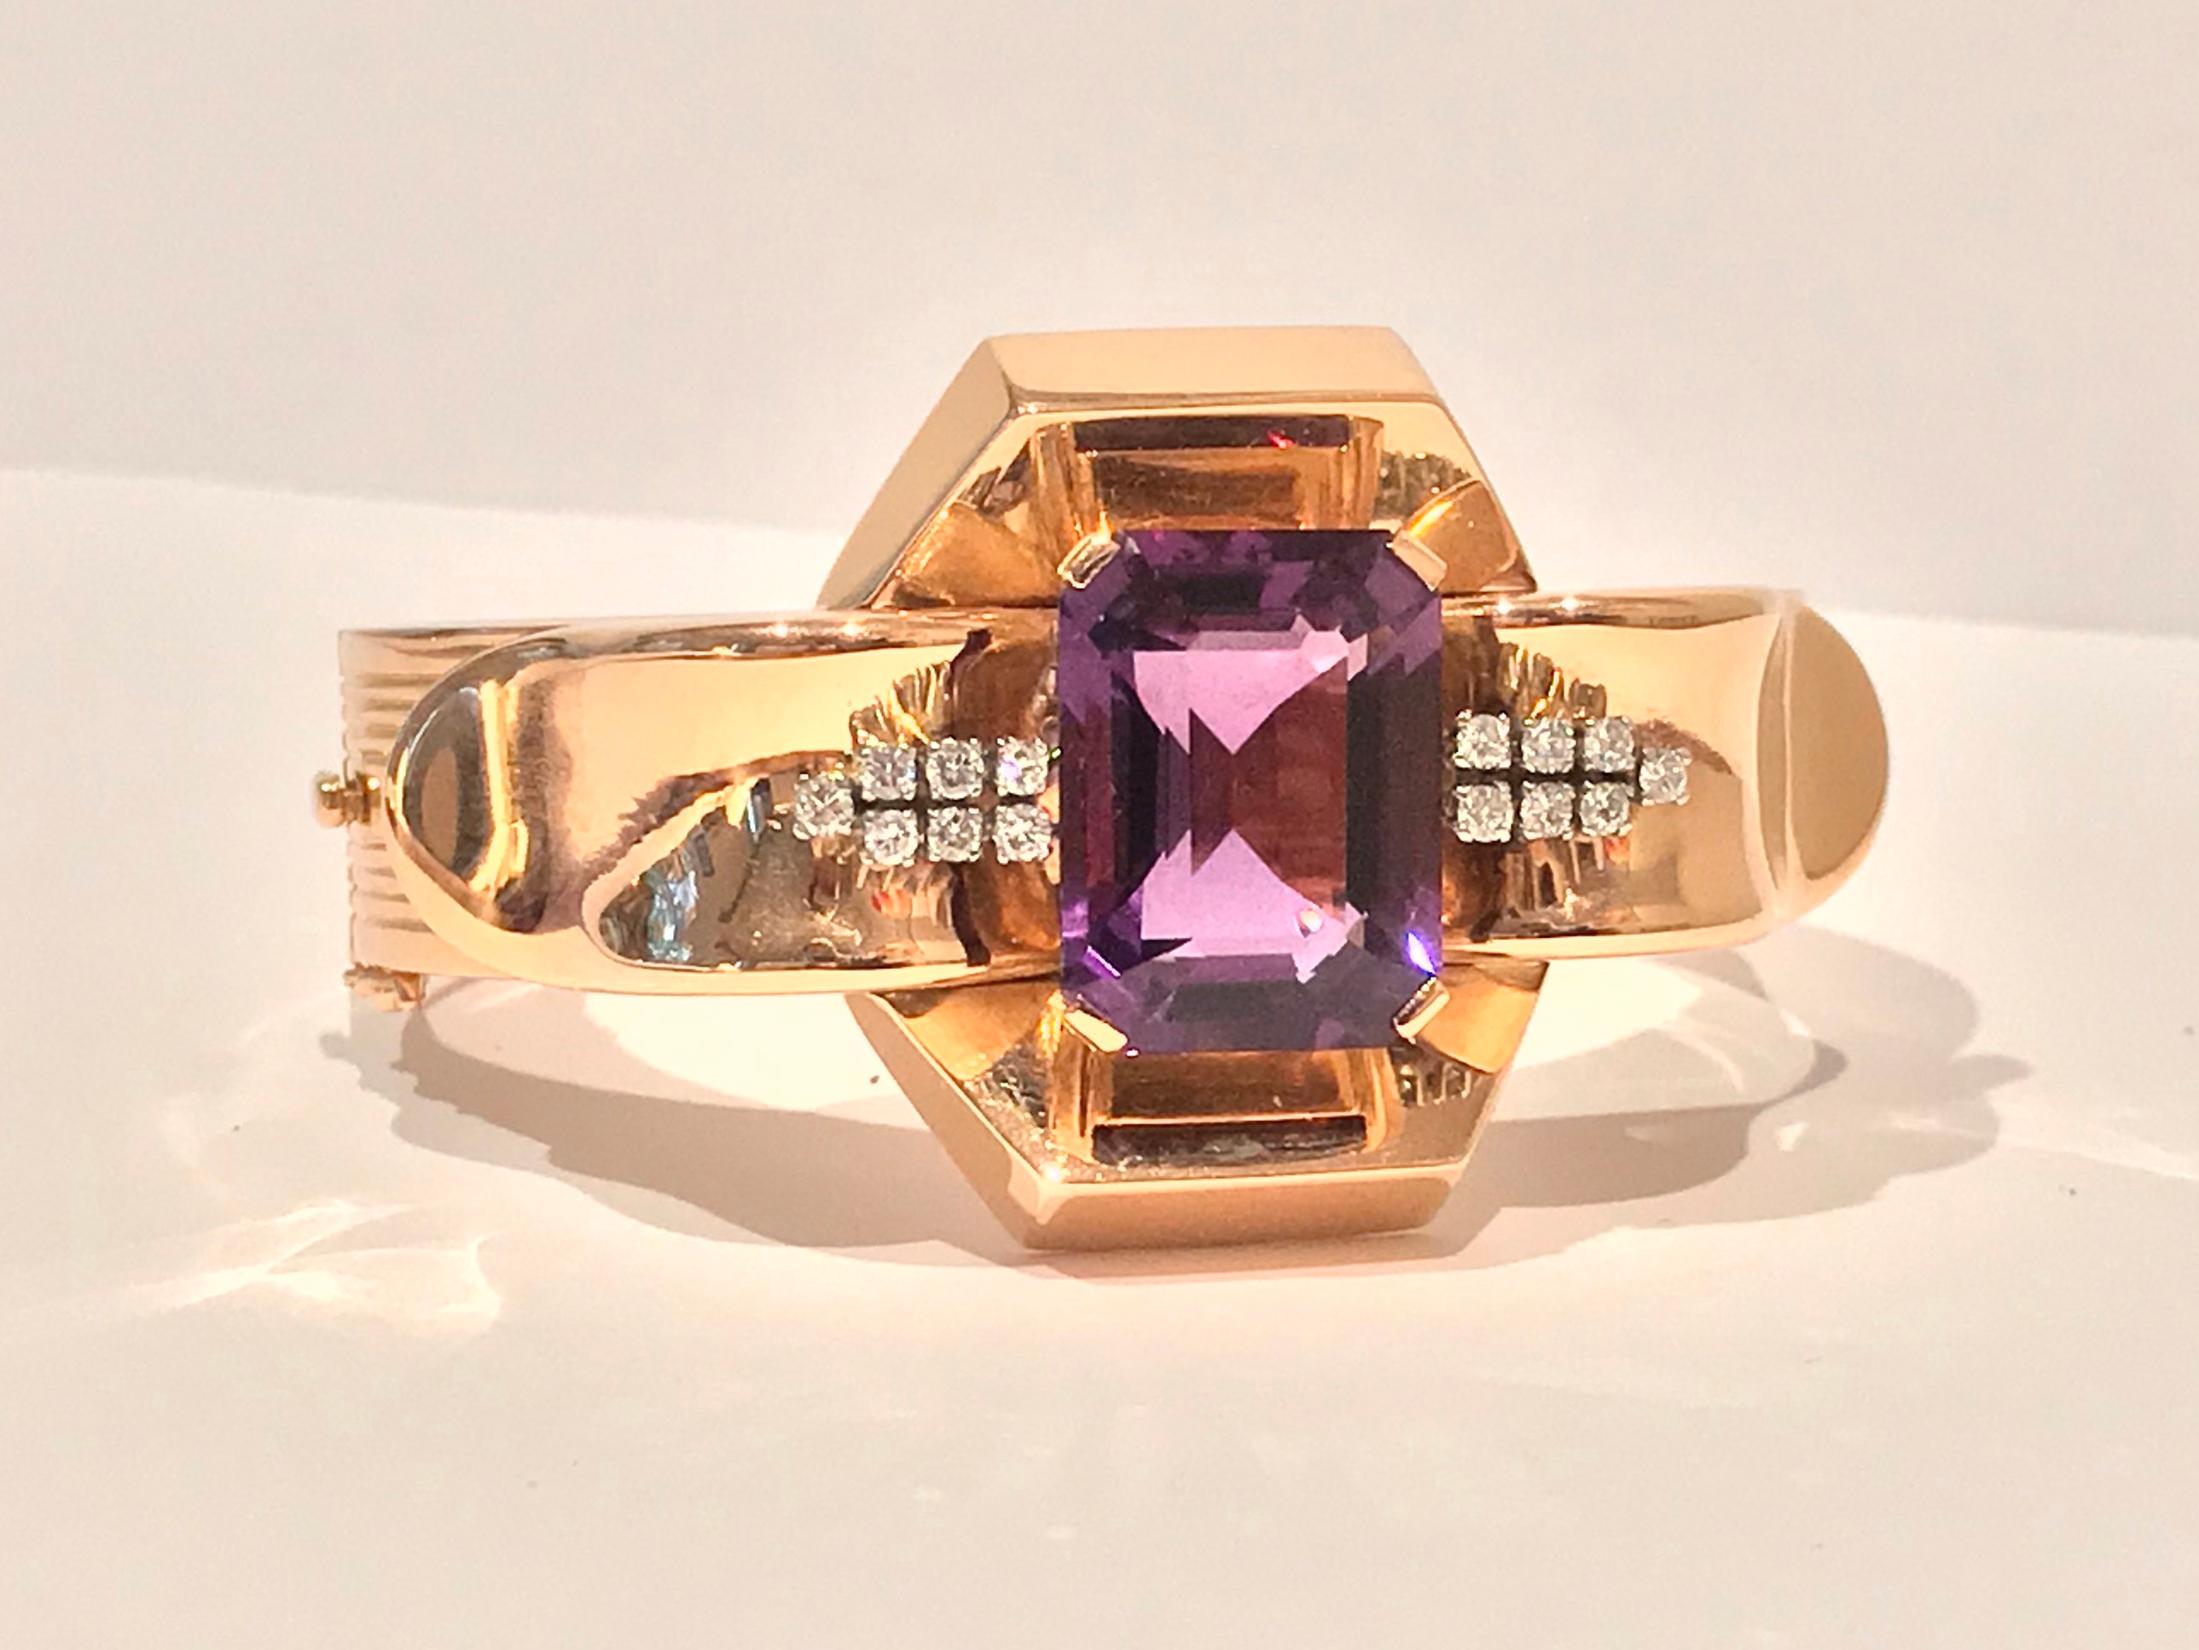 Large 18K Amethyst and Diamond Bangle, mid 20th century, French owl import and 18K marks. The hinged bangle set in the center with a fine rectangular emerald cut purple amethyst, gauging approximately 21.0 x 15.5 mm and accepted on each side with